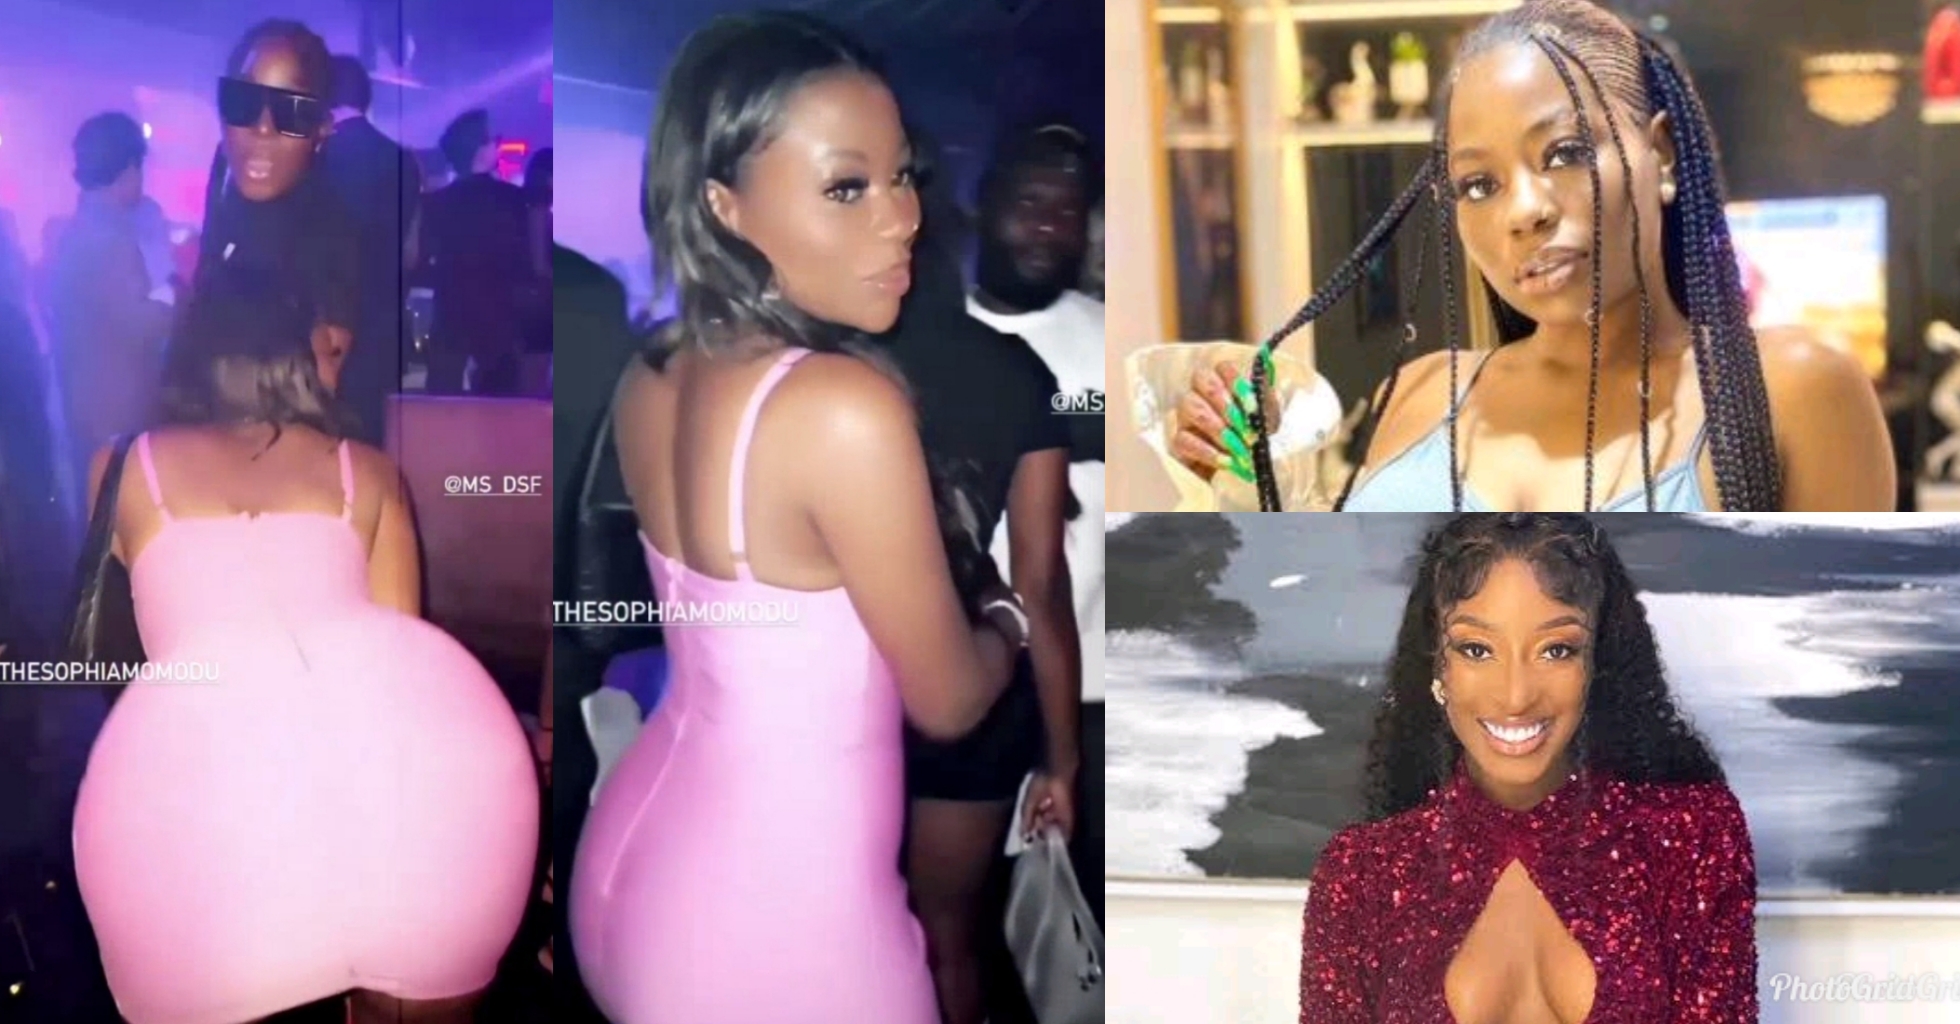 Sophia Momodu's backside raises eyebrows as she parties with Dorcas Fapson at nightclub in France - VIDEO